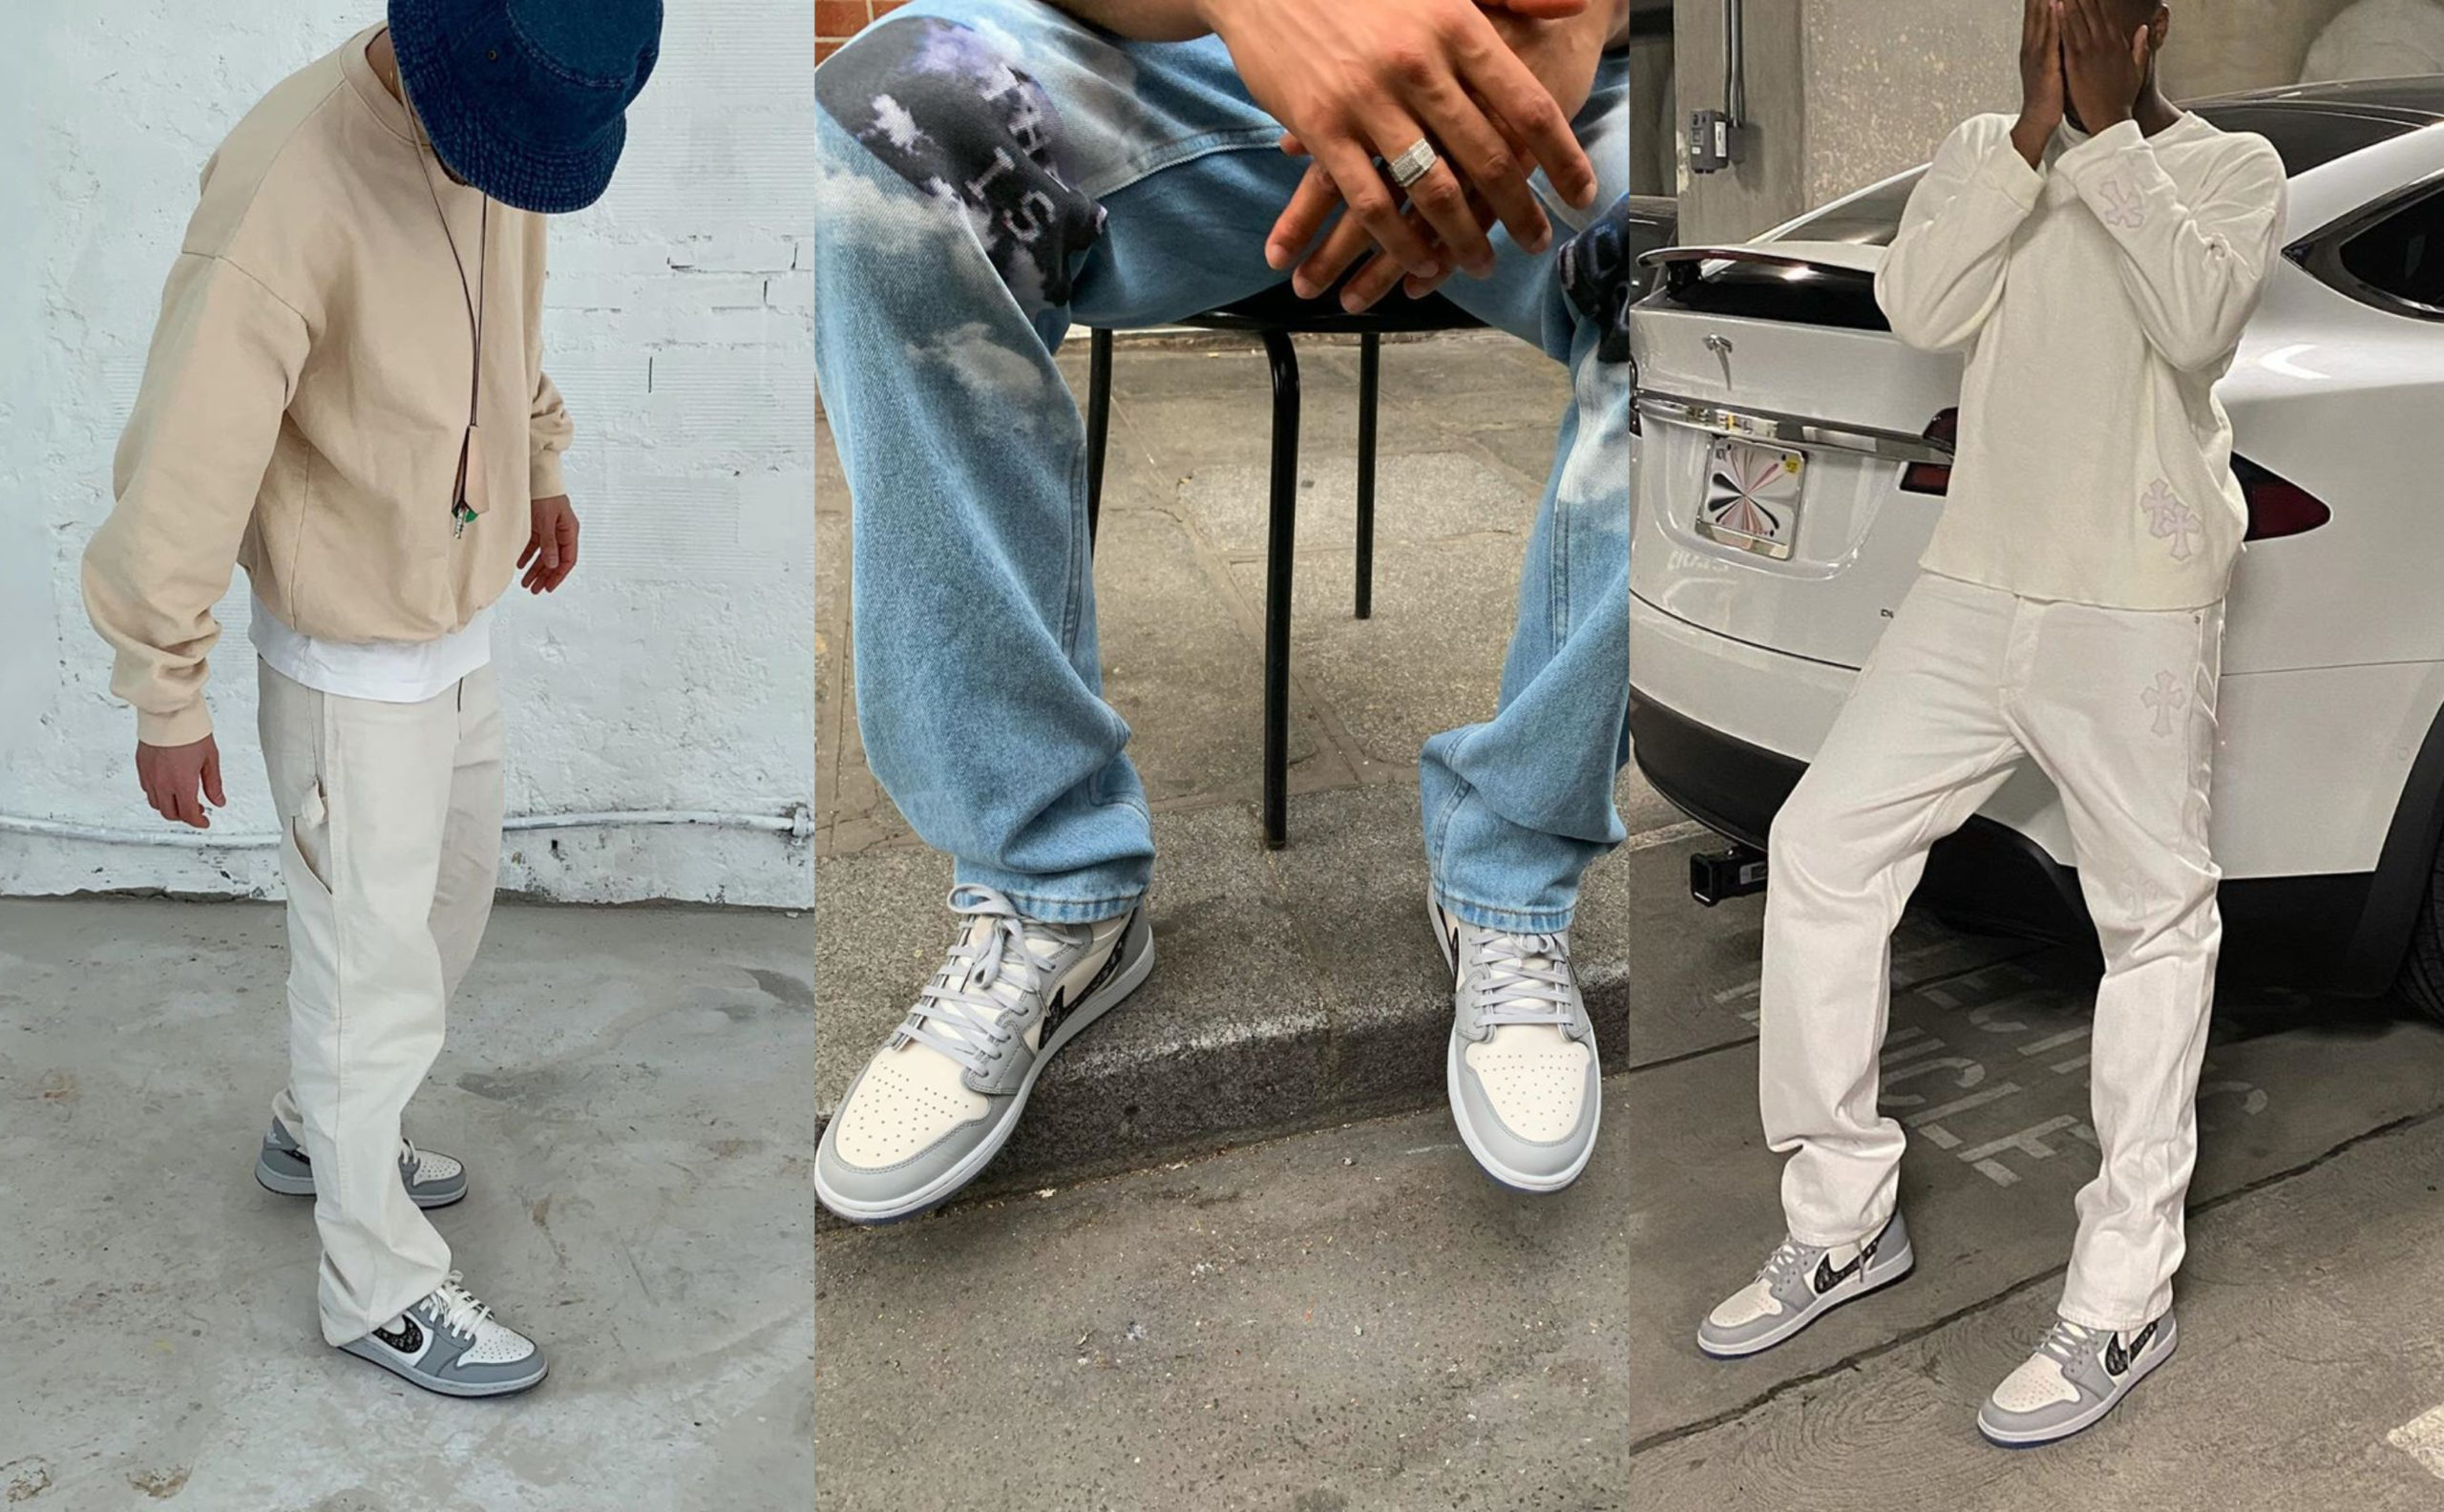 SPOTTED: The Early Adopters of the Dior X Nike AJ1